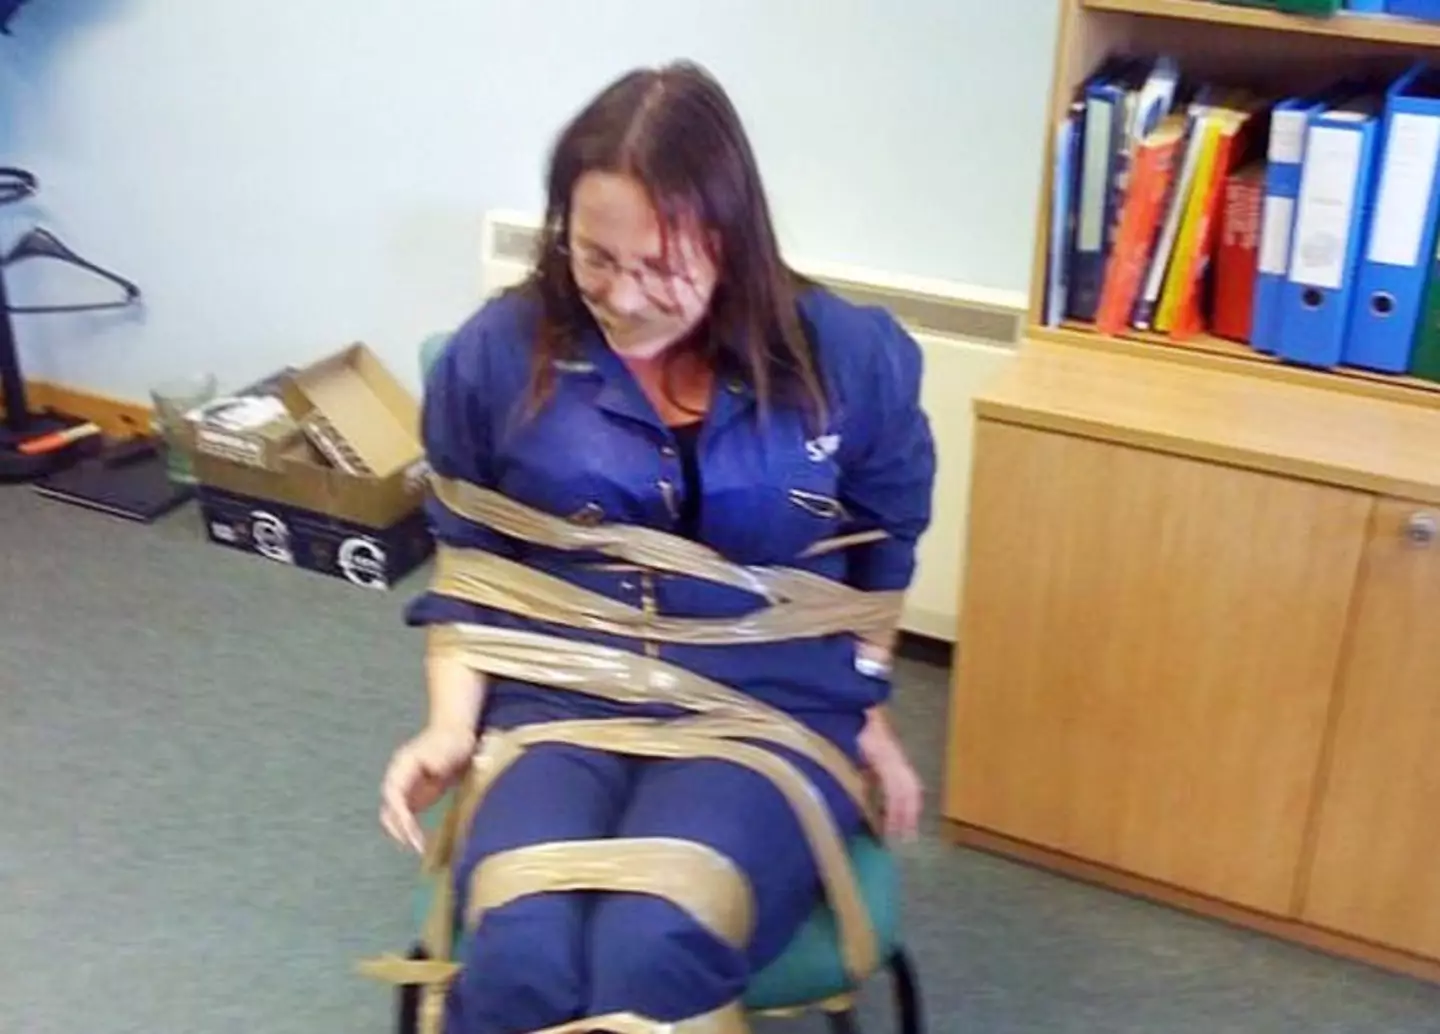 Ms Fitzpatrick was pictured gagged and tied to her chair.